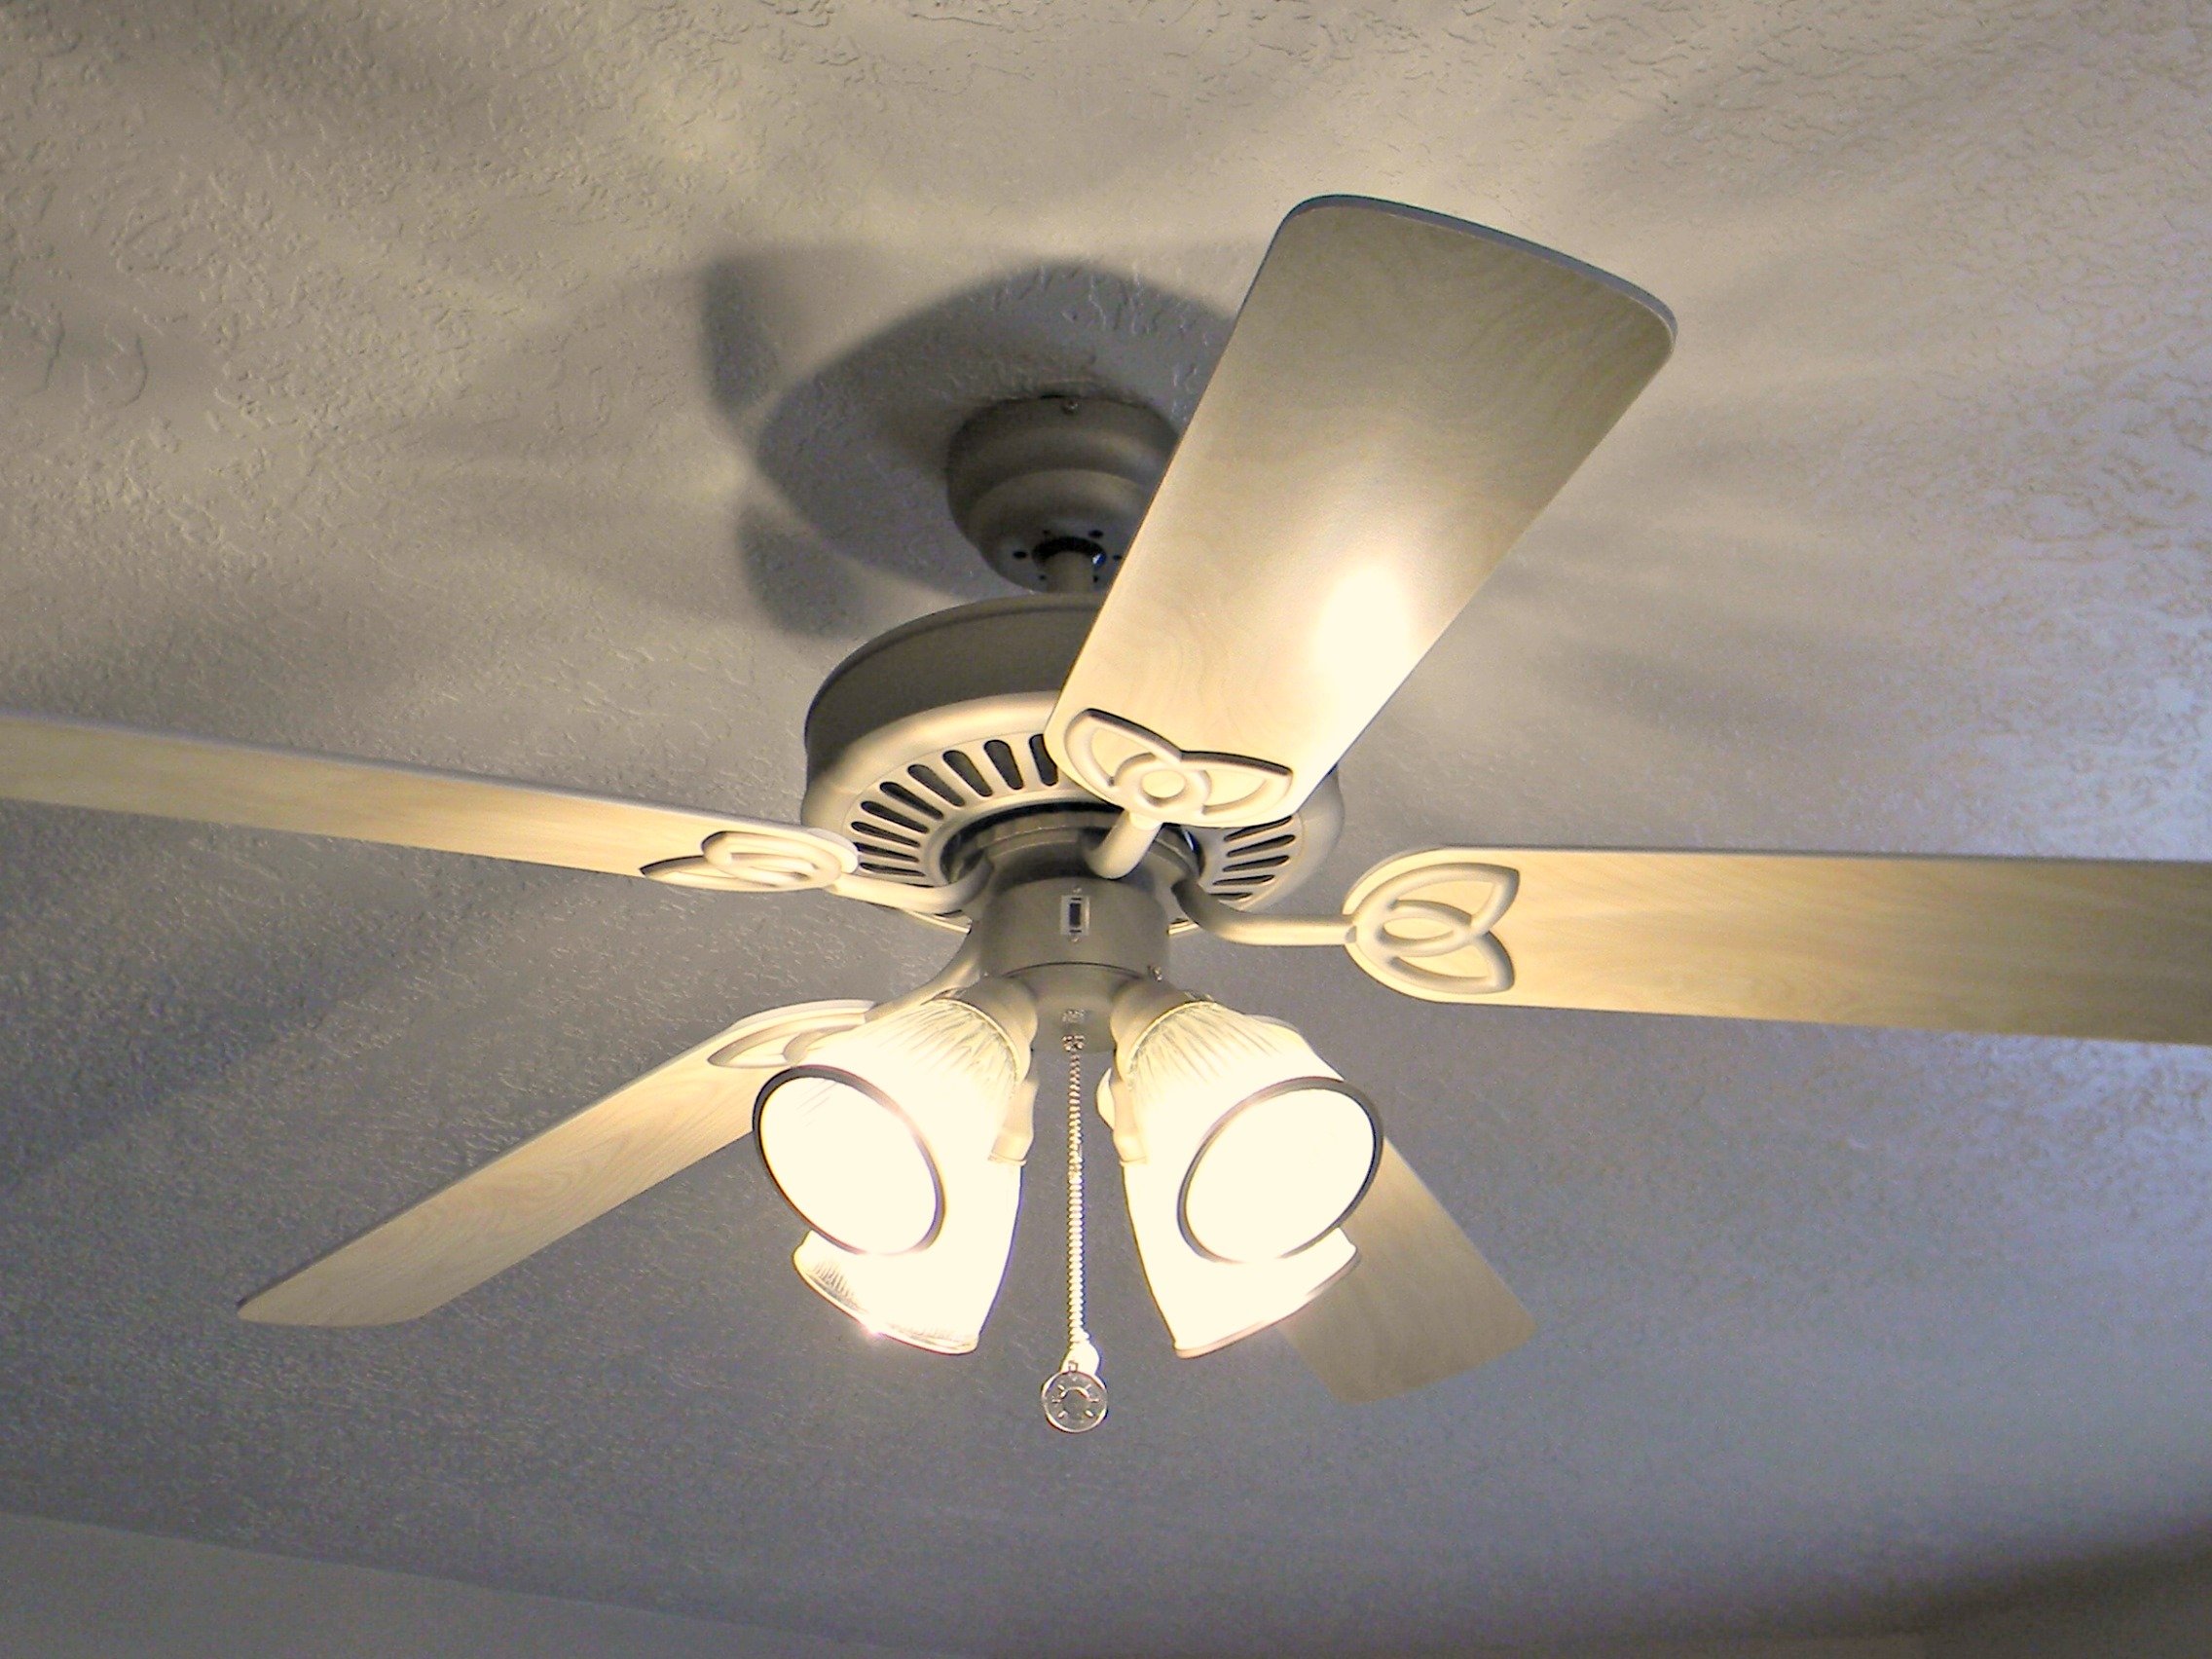 Lighted Ceiling Fans